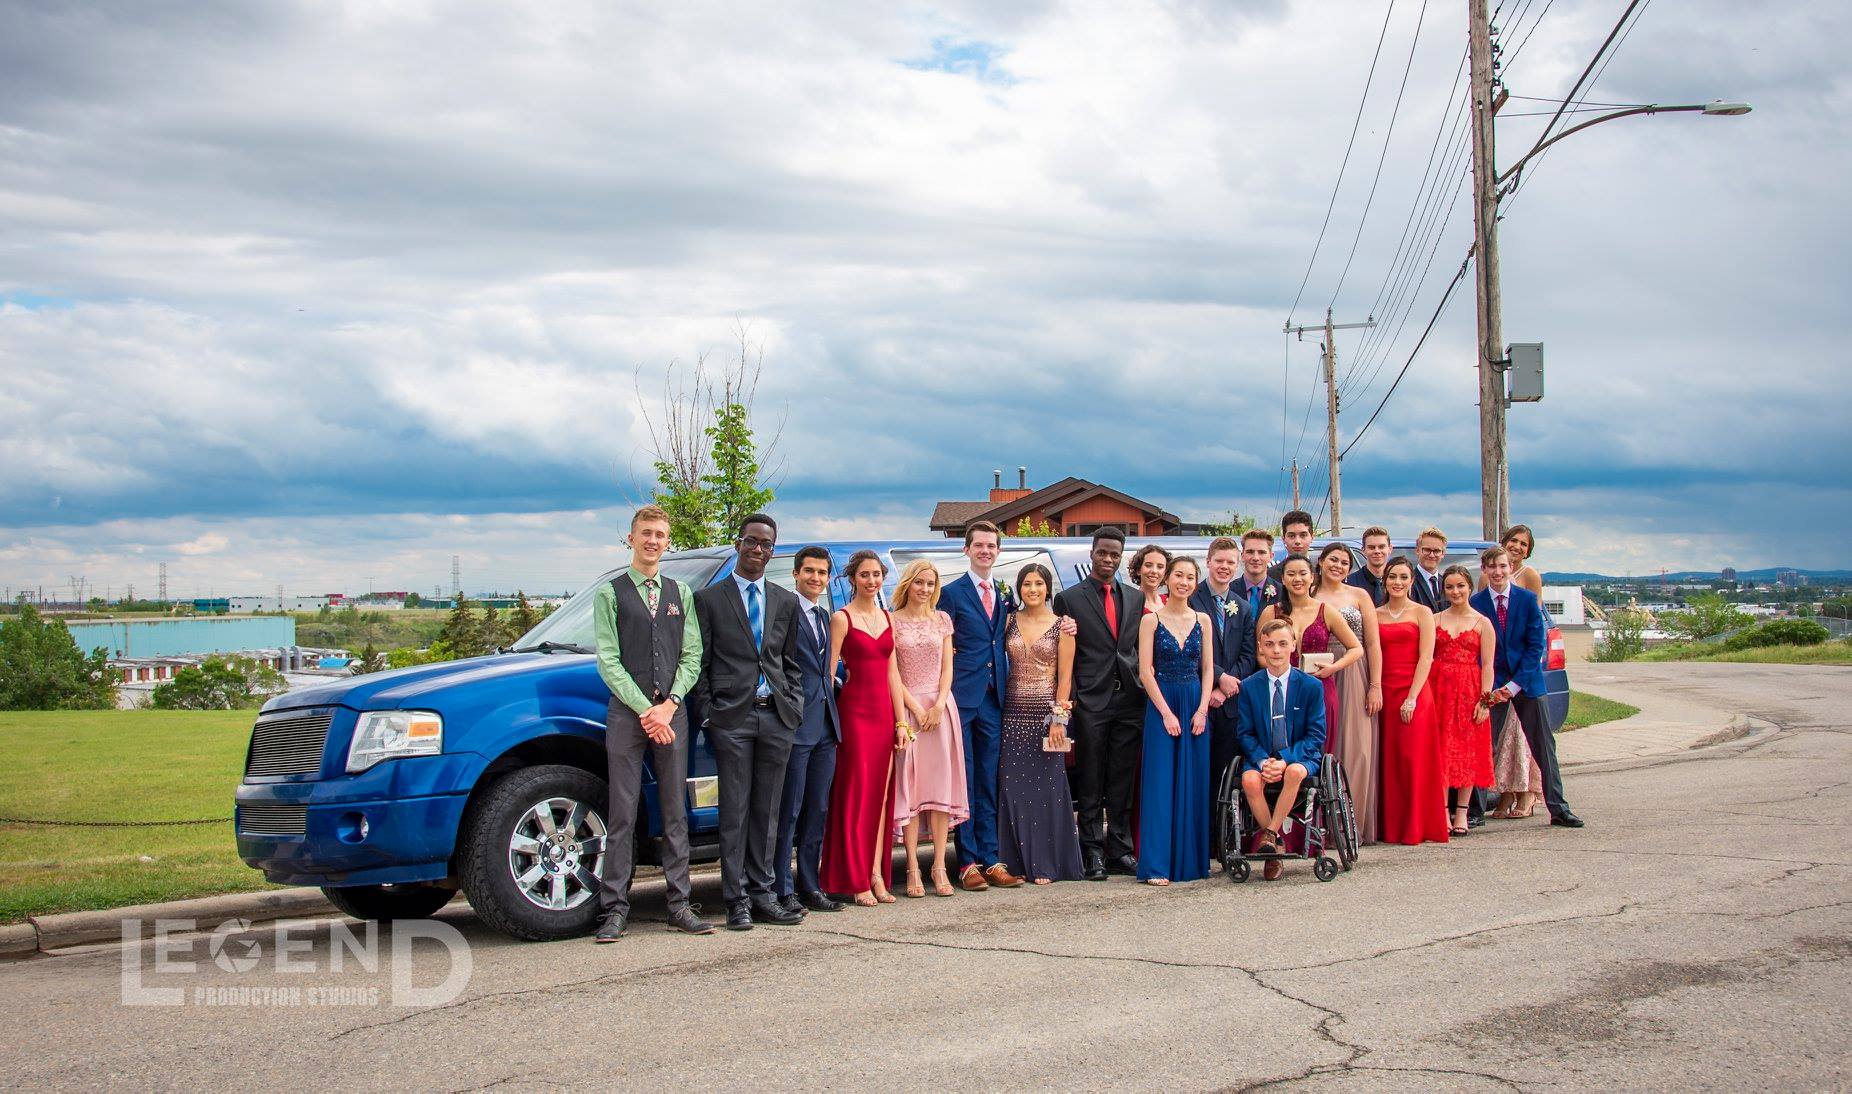 Graduation group takes photo in front of Blue Expedition Limousine